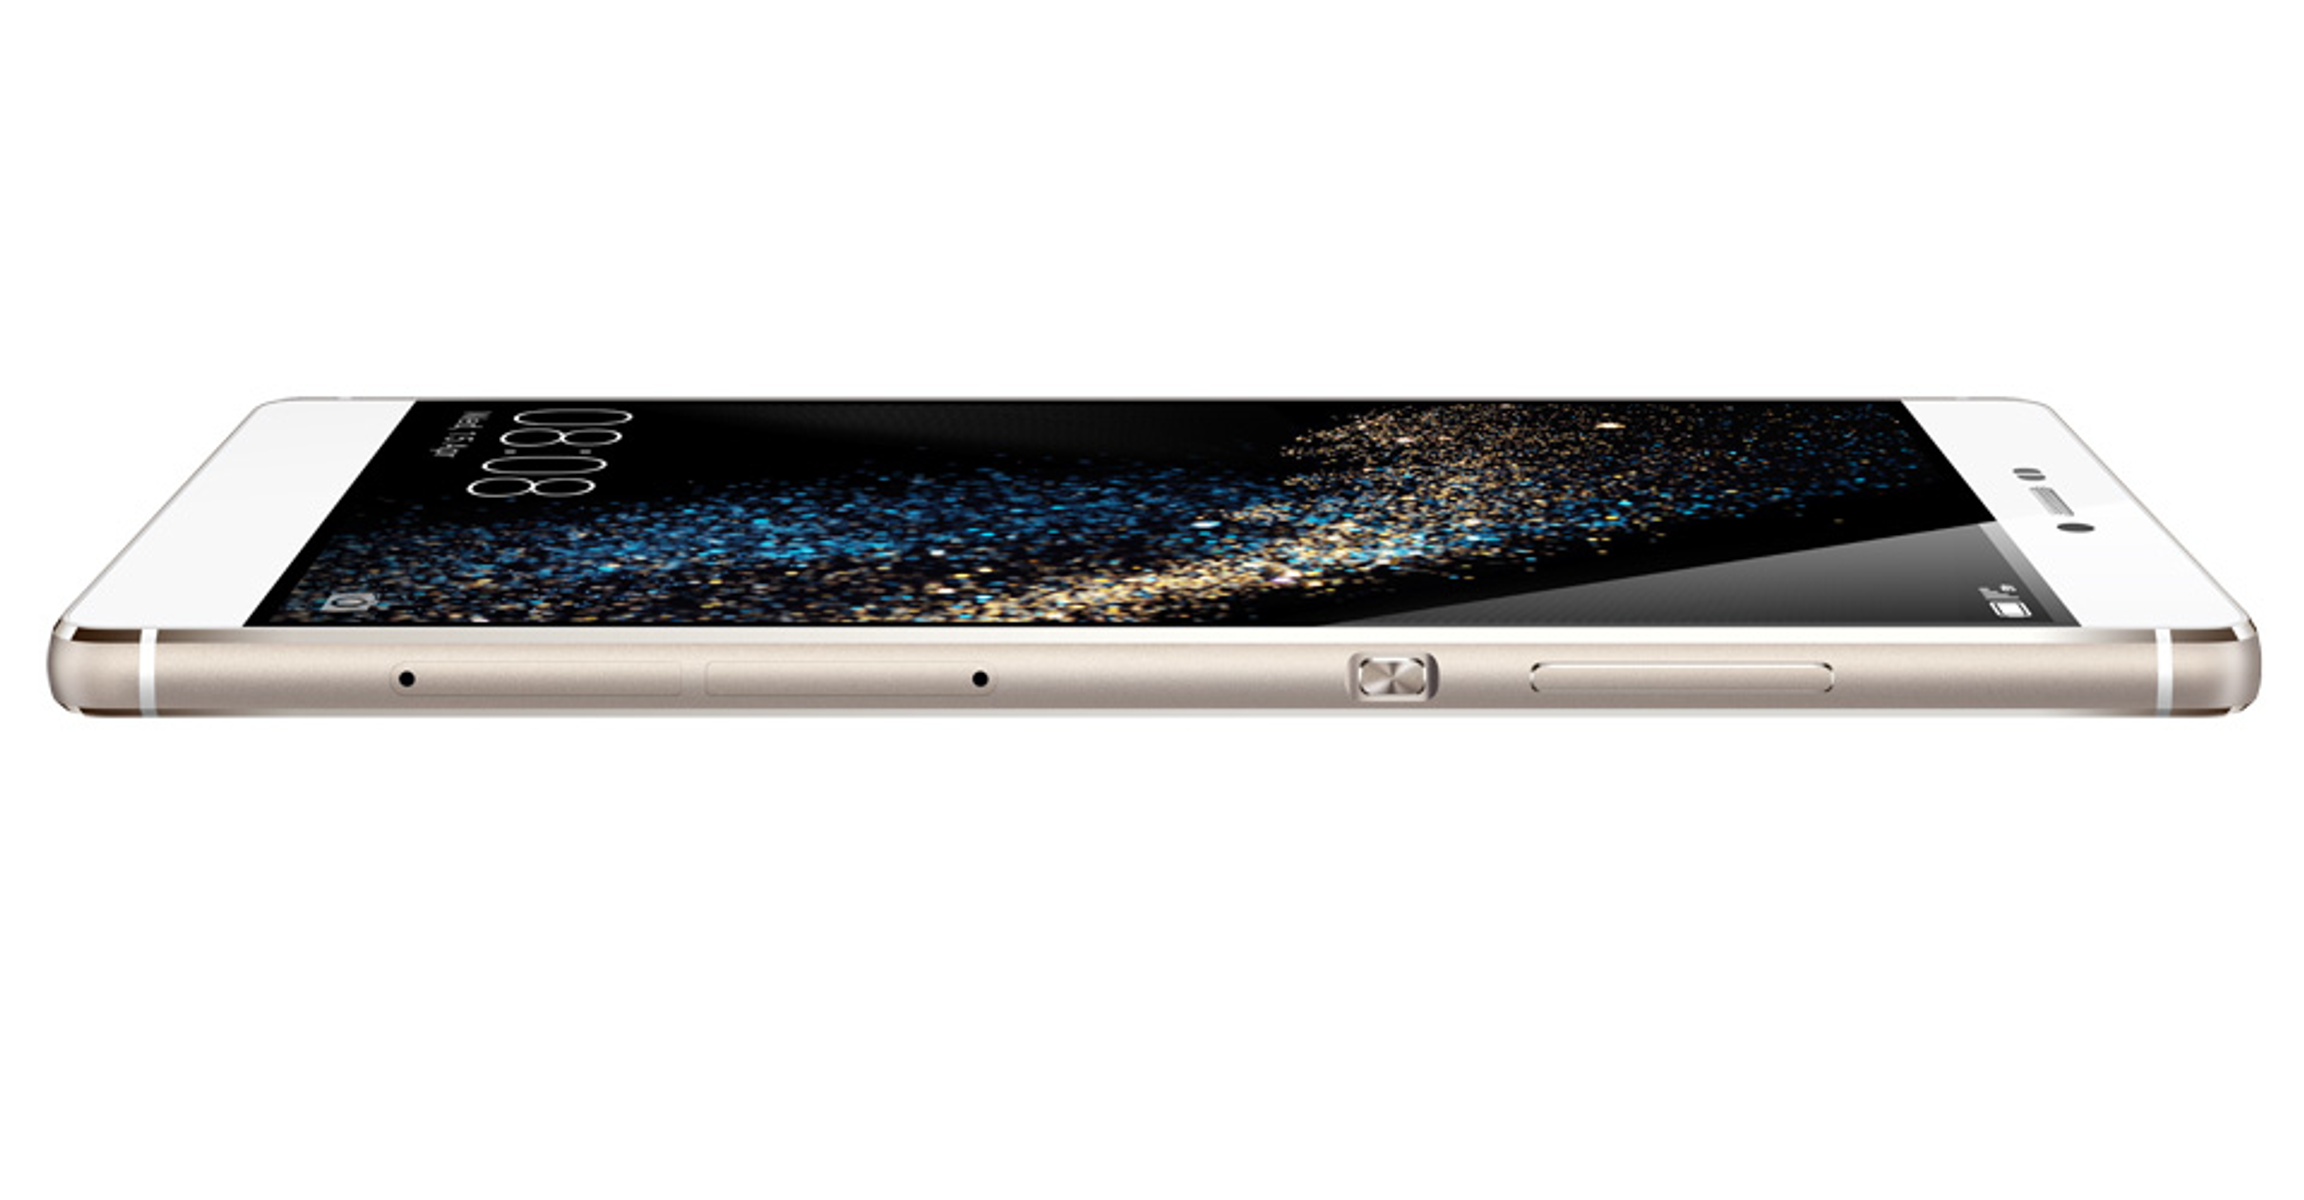 HUAWEI P 8 MYSTICE CHAMPAGNE 16 GB Champagner